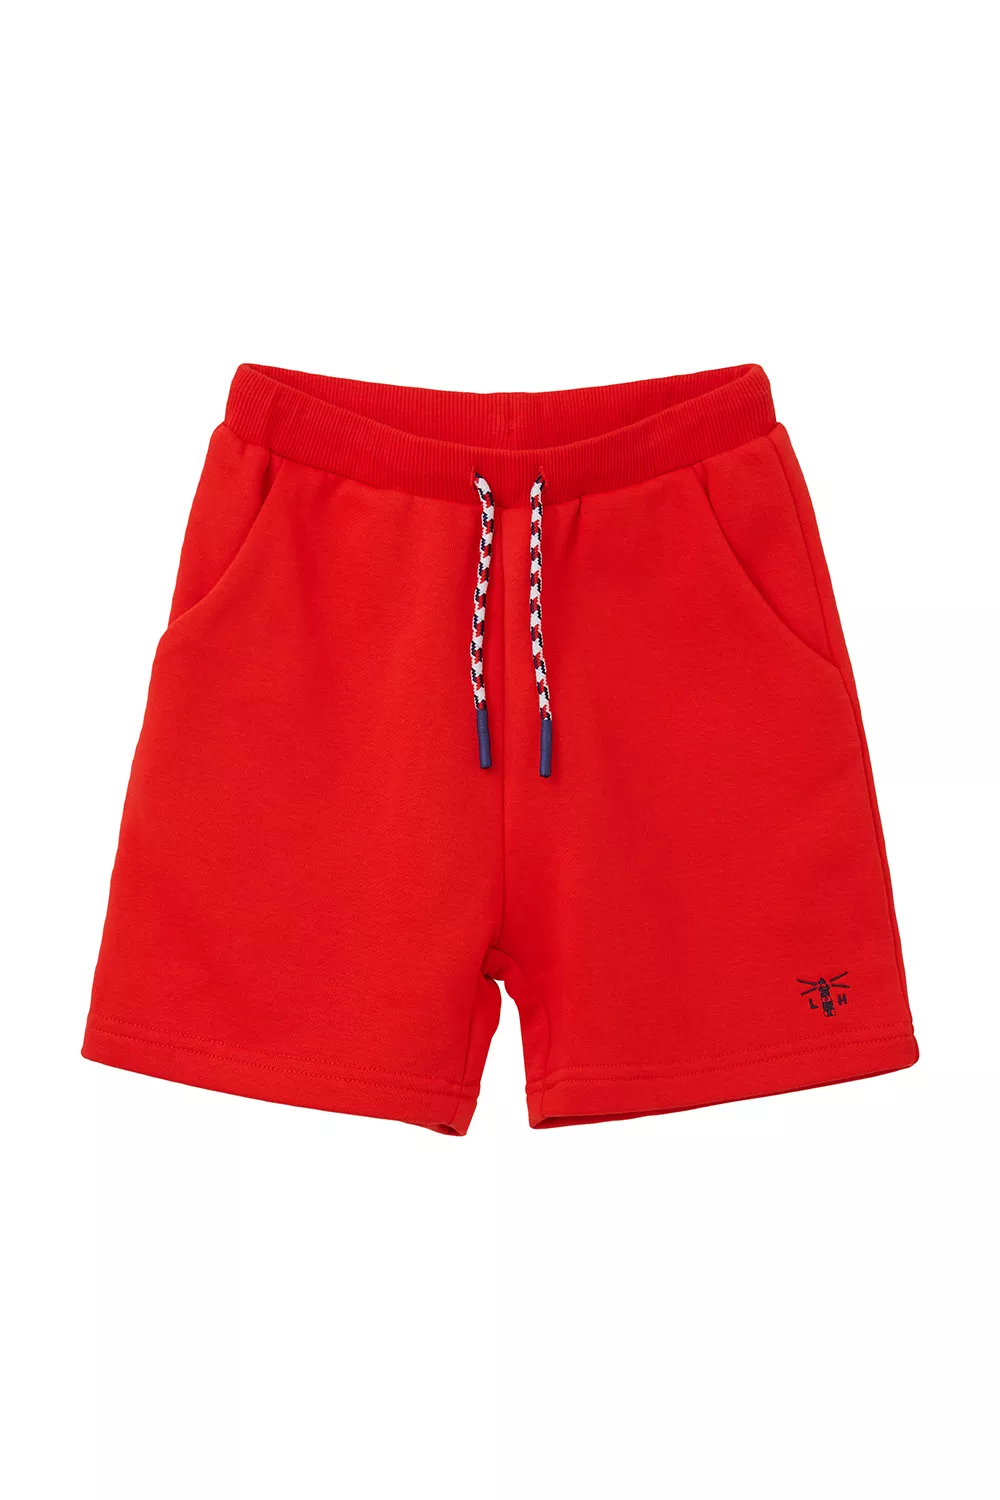 Louie Shorts Red 5-6yrs